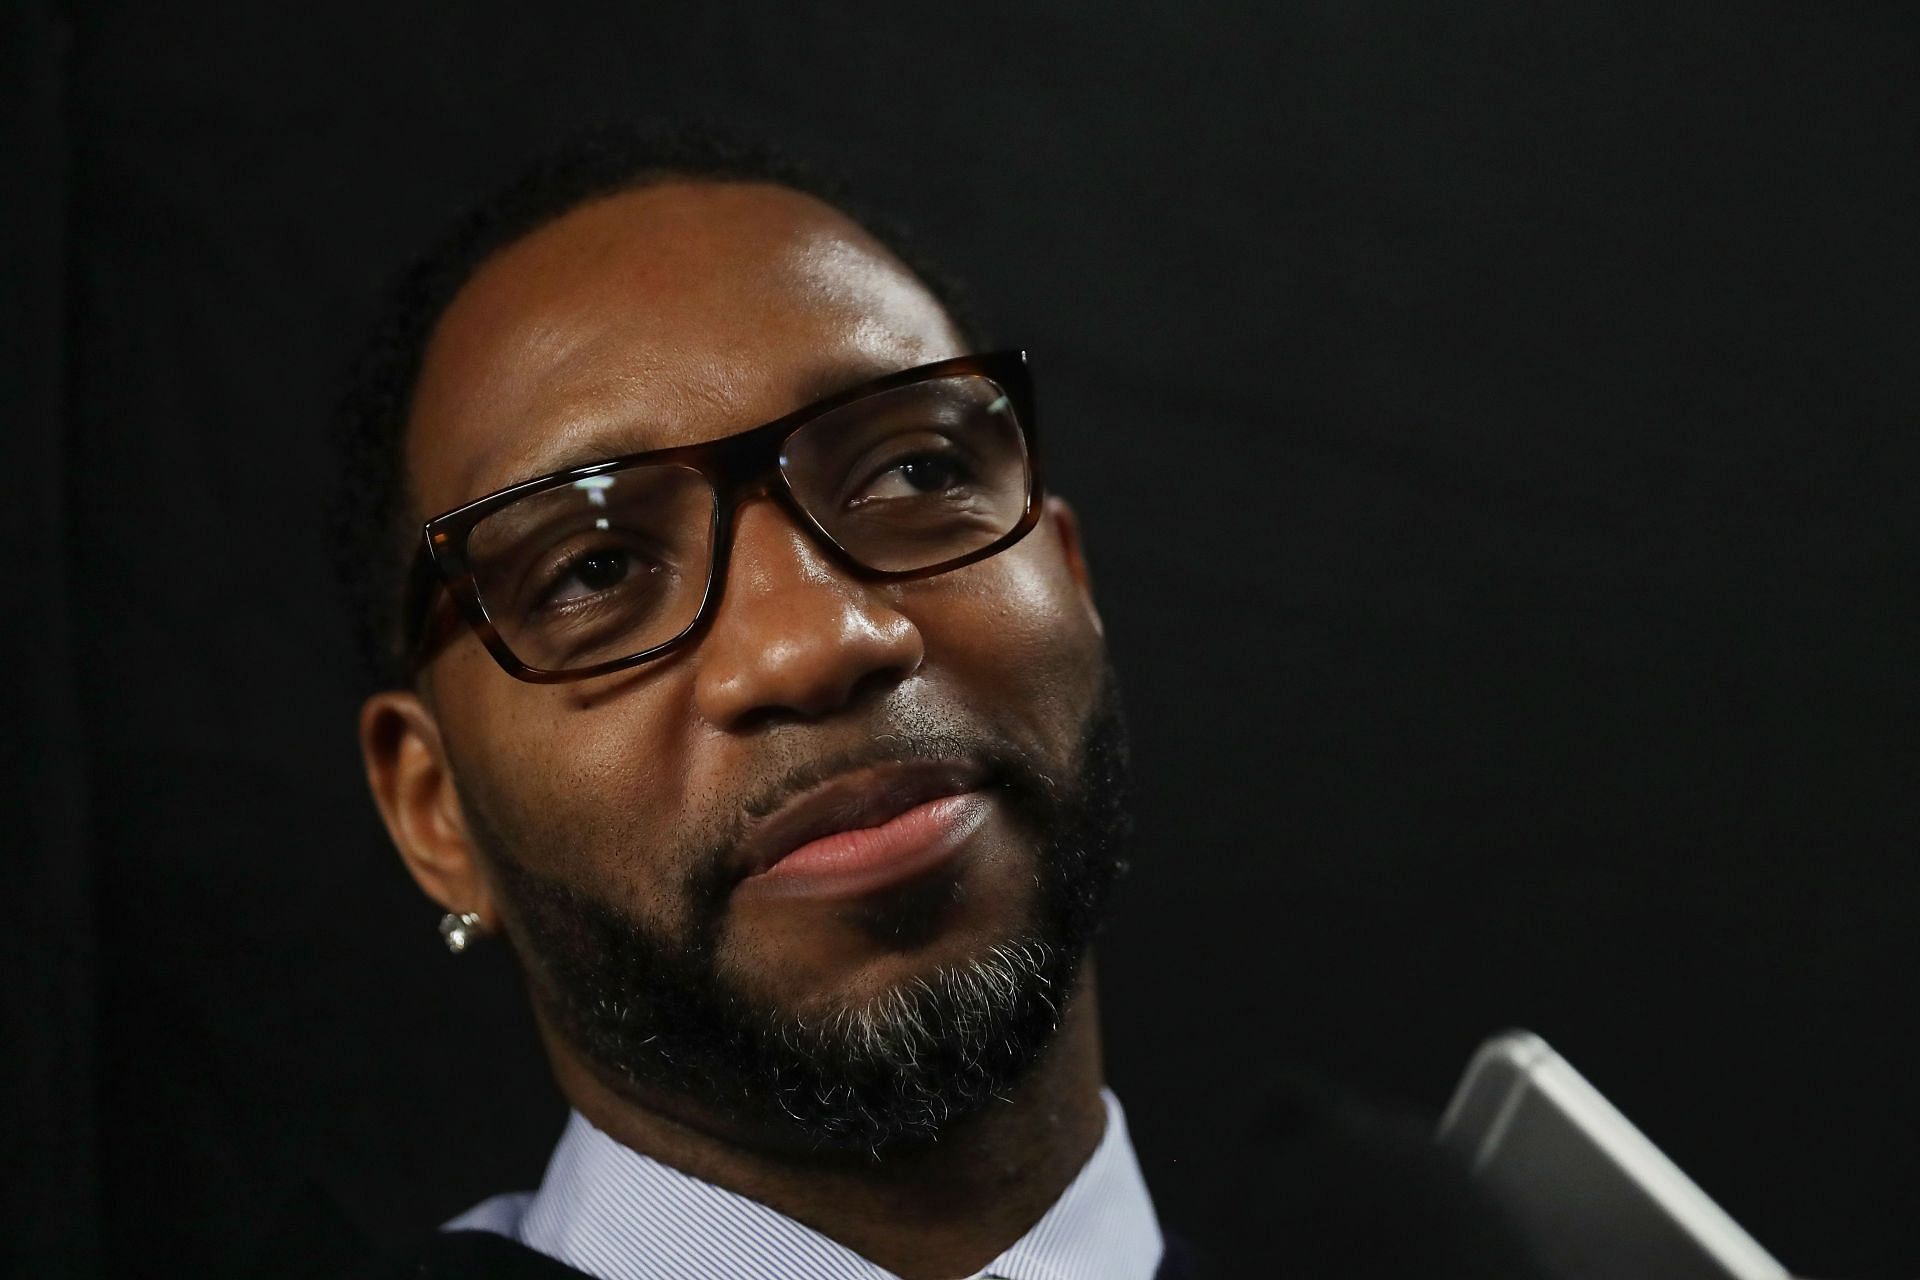 Despite having a Hall of Fame career, college basketball could have been beneficial for McGrady